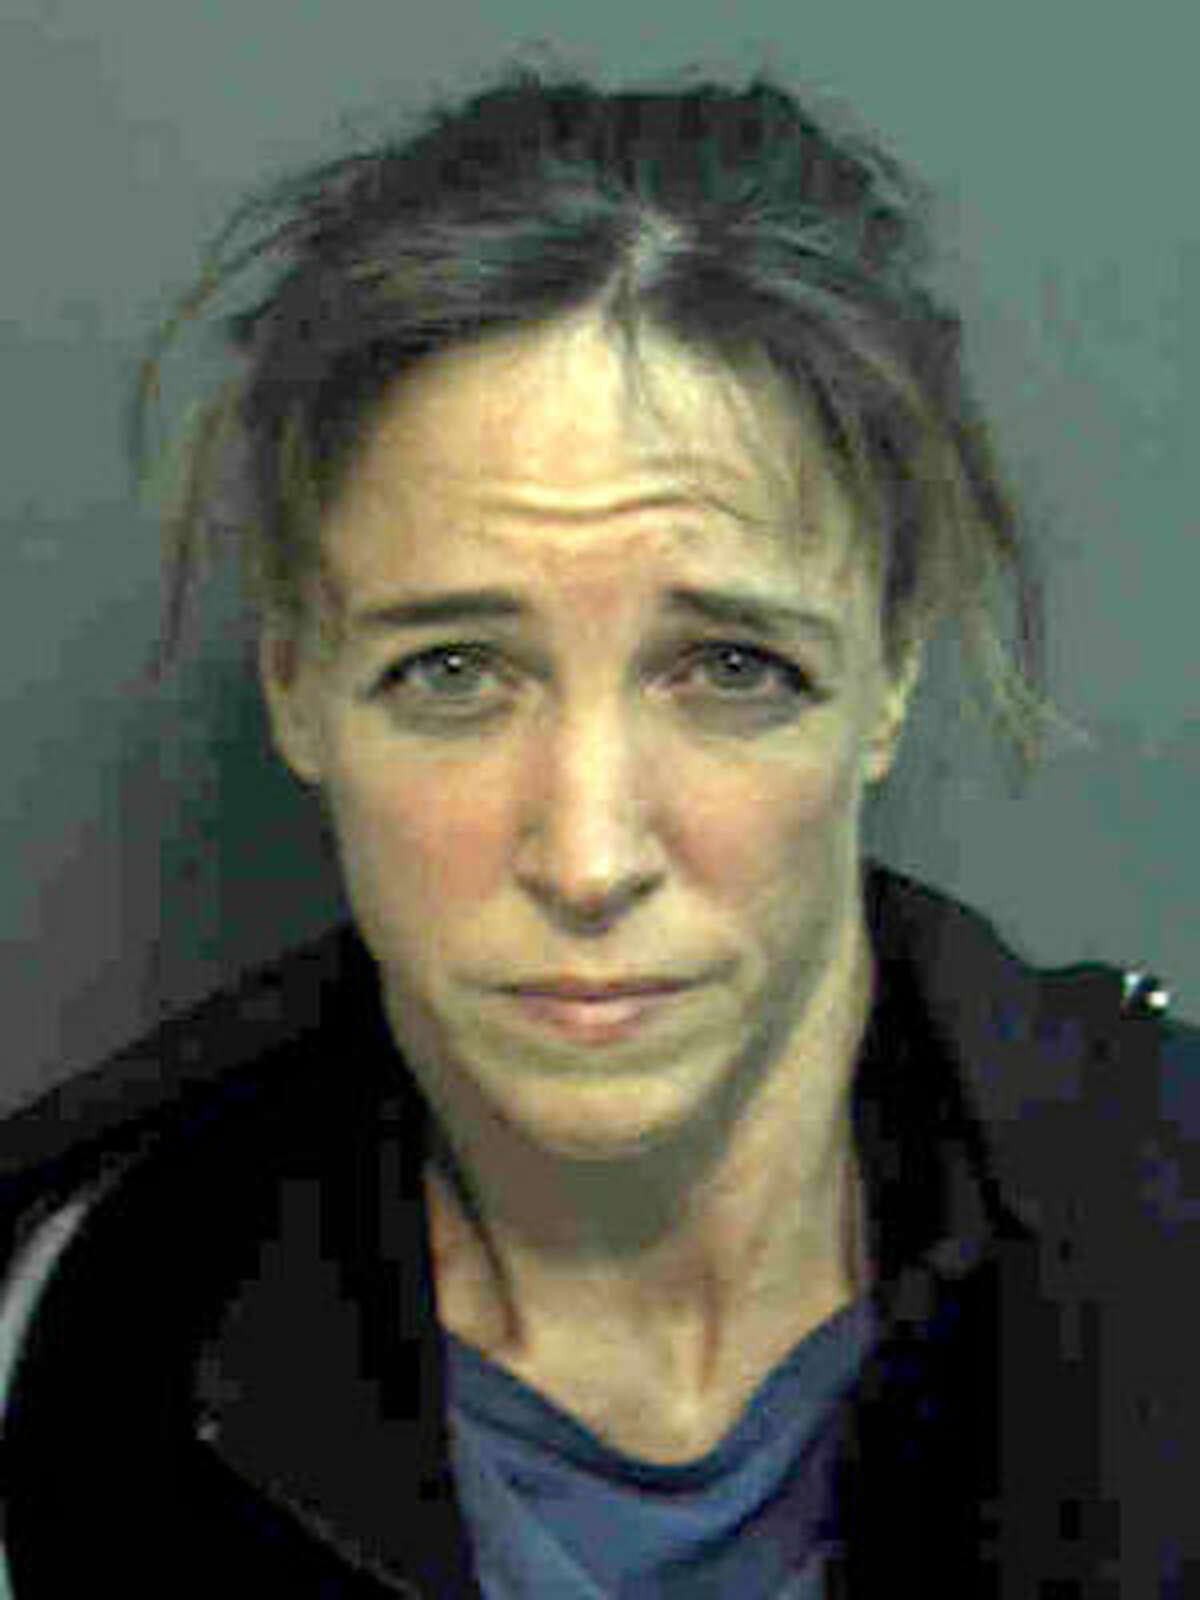 This police booking photo shows astronaut Lisa Nowak following her arrest for attempting to kidnap a woman she believed was romantically involved with another astronaut.